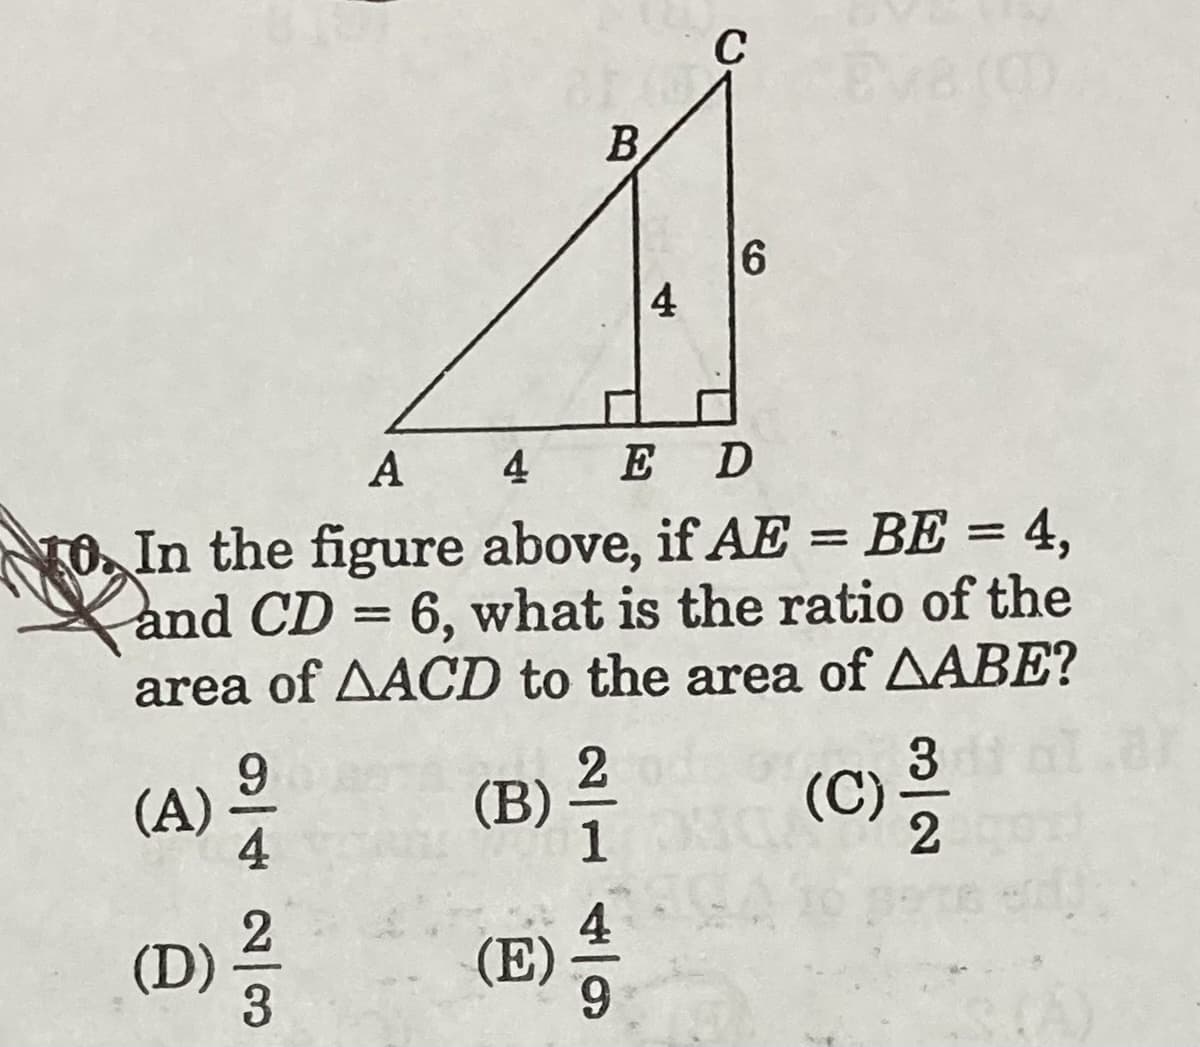 C
Everm
B
4
A
4 E D
O In the figure above, if AE = BE = 4,
and CD = 6, what is the ratio of the
area of AACD to the area of AABE?
1
(A) -
(c)
(B)
1
(C)
4
(D)
3
(E):
6.
3/2
